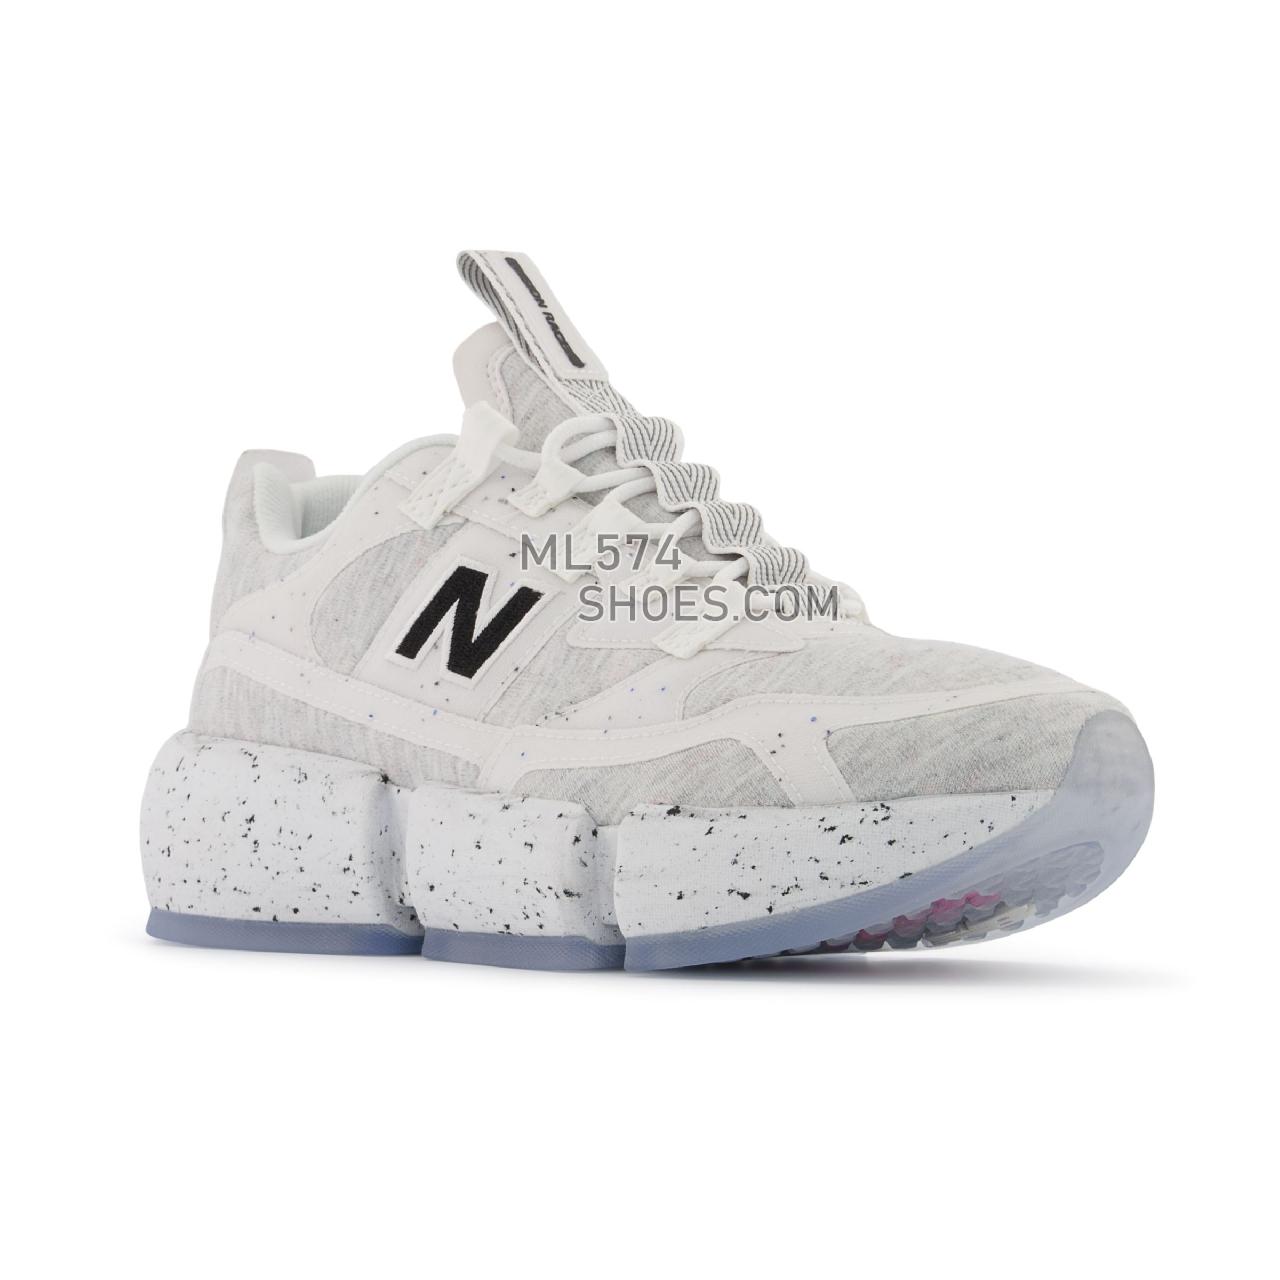 New Balance Vision Racer ReWorked - Unisex Men's Women's Sport Style Sneakers - Nb White with Peony and Black - MSVRCRGA